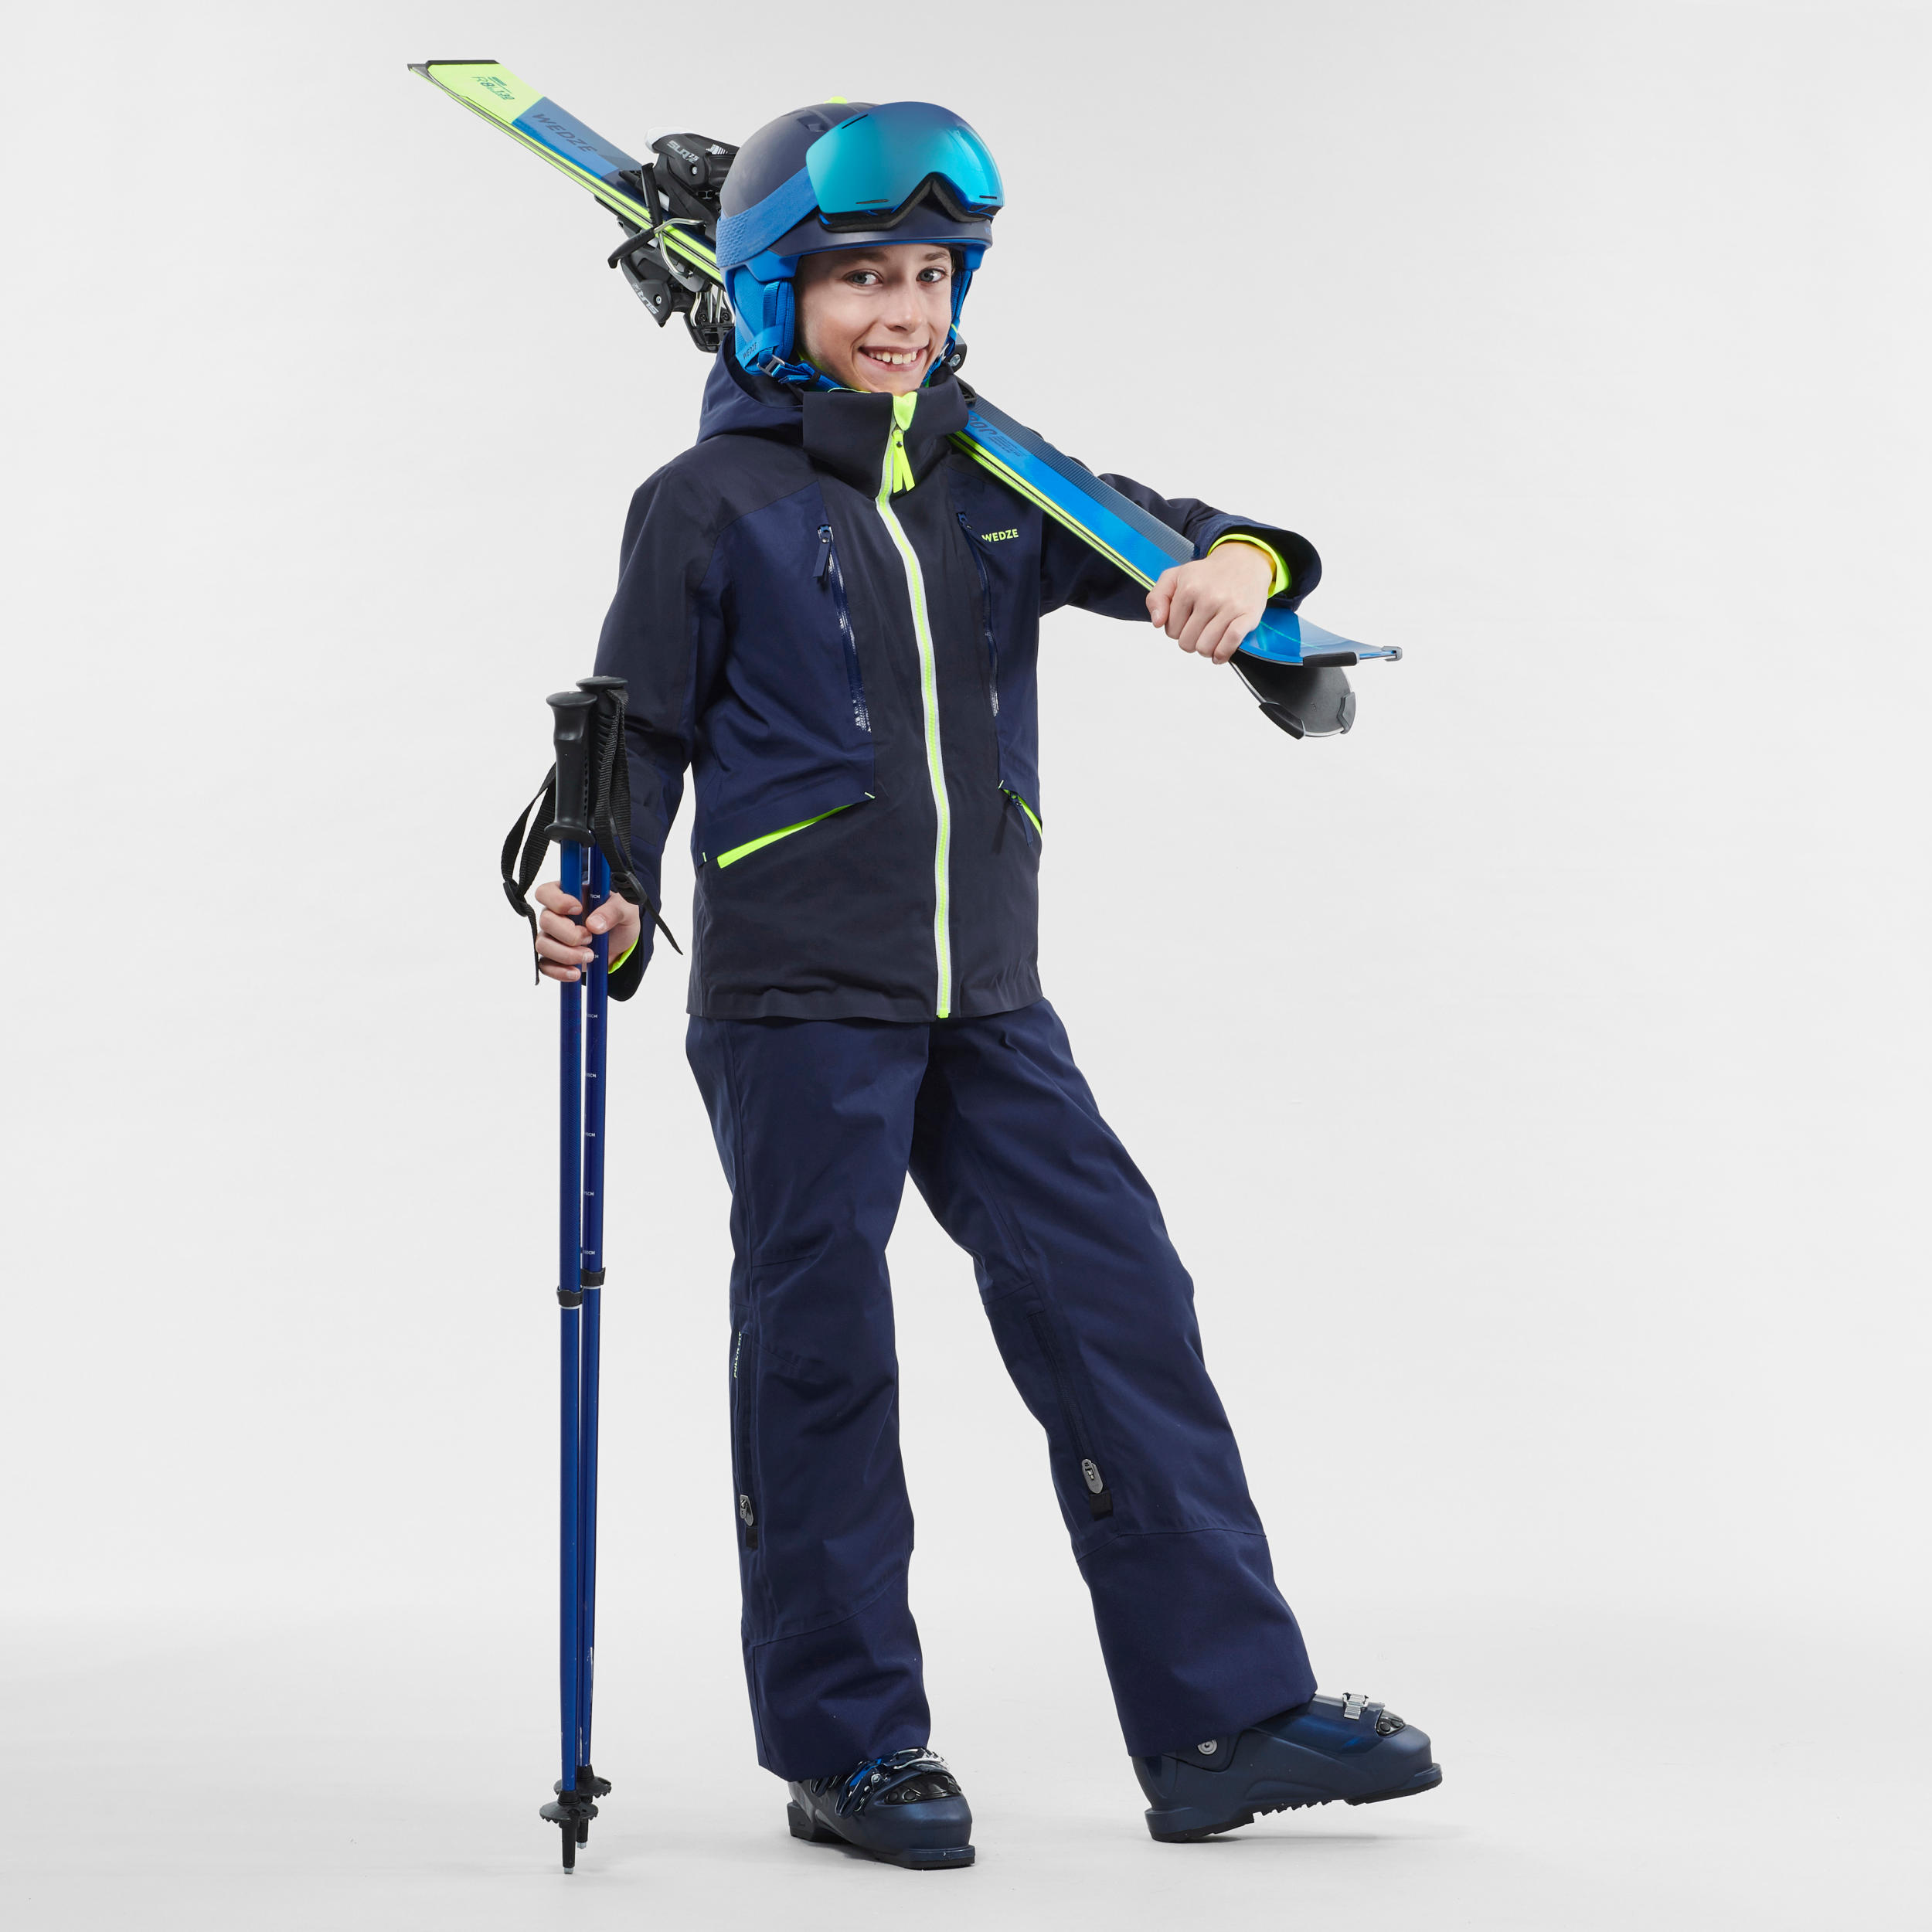 Kids’ Ski Pants with Removable Straps - PNF 900 Blue - WEDZE